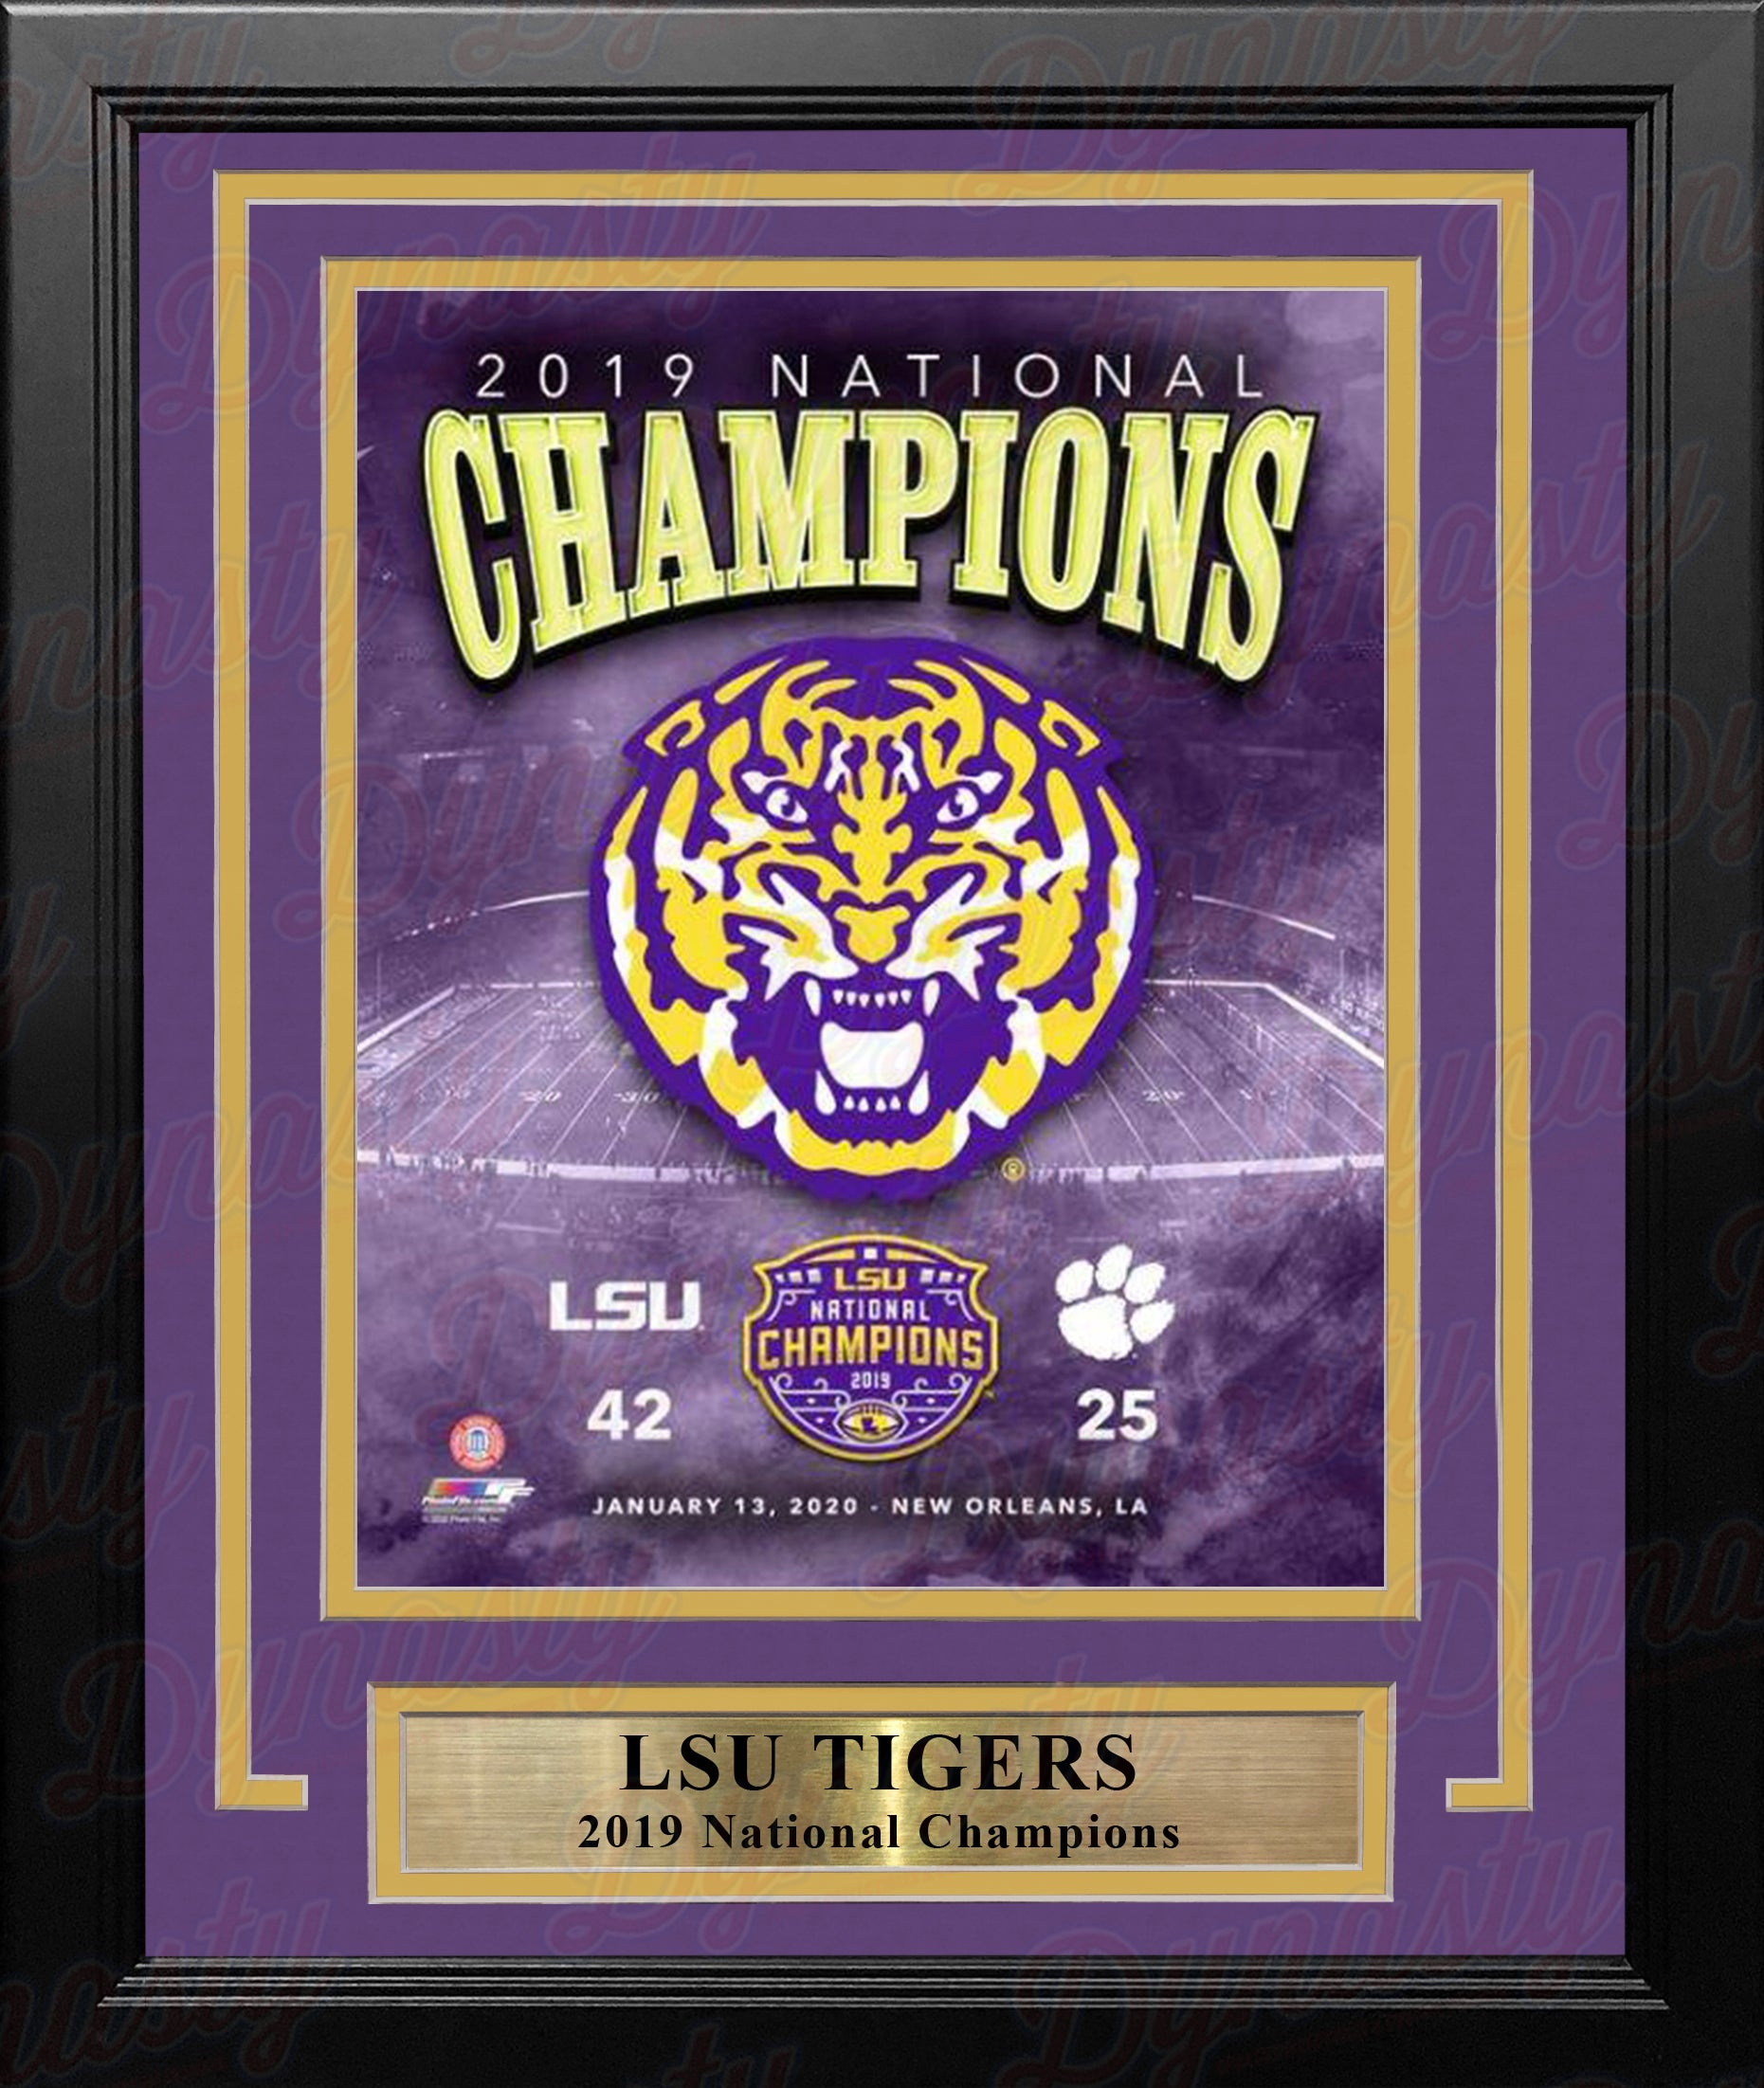 LSU Tigers 2019 National Champions Logo & Score 8" x 10" Framed College Football Photo - Dynasty Sports & Framing 